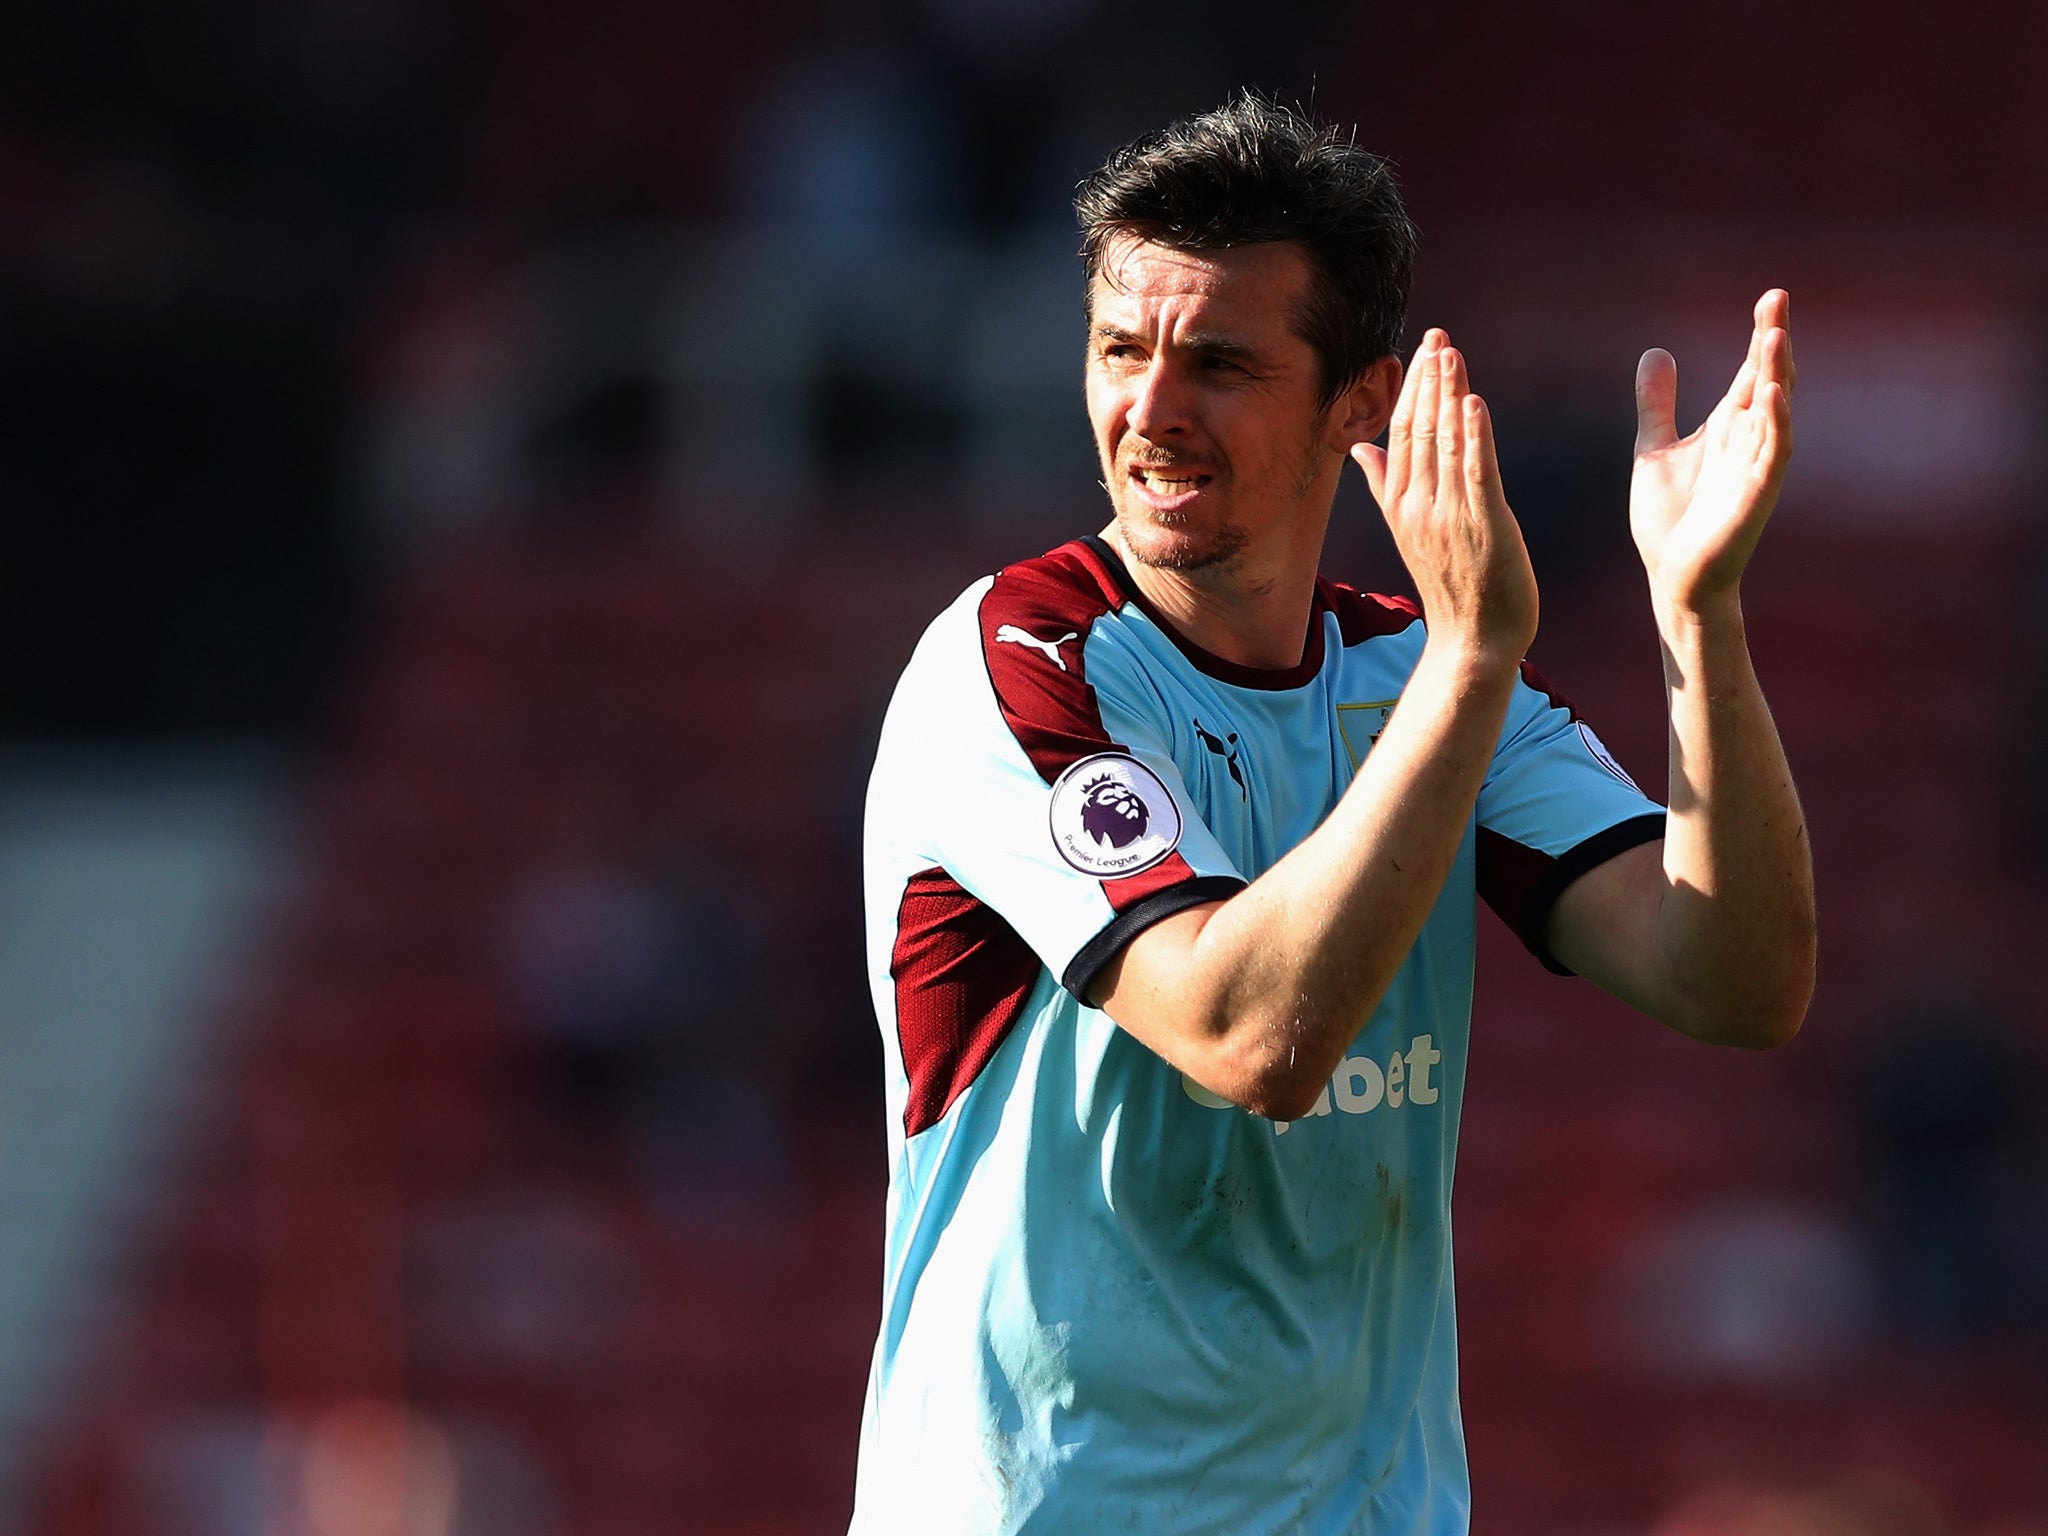 Joey Barton has vowed that he will not retire in the wake of his 18-month ban for betting on matches